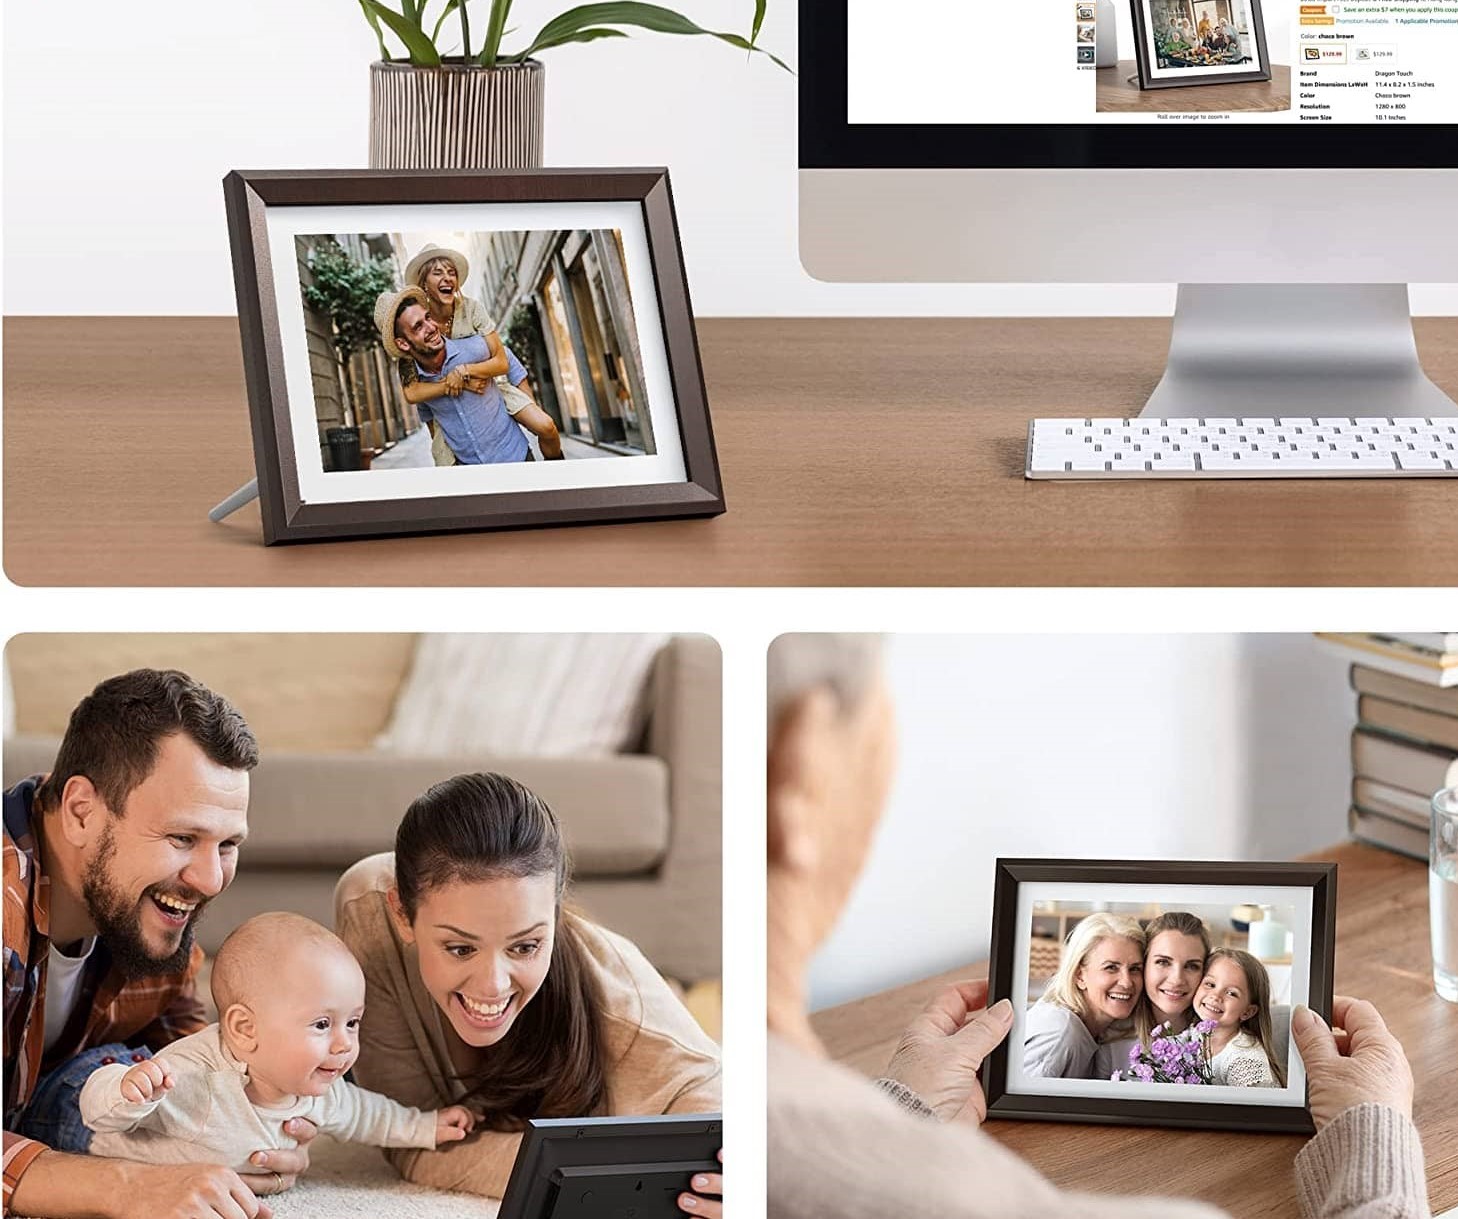 The 5 Best Digital Photo Frames in 2022 Stay Connected with Memories and Loved ones